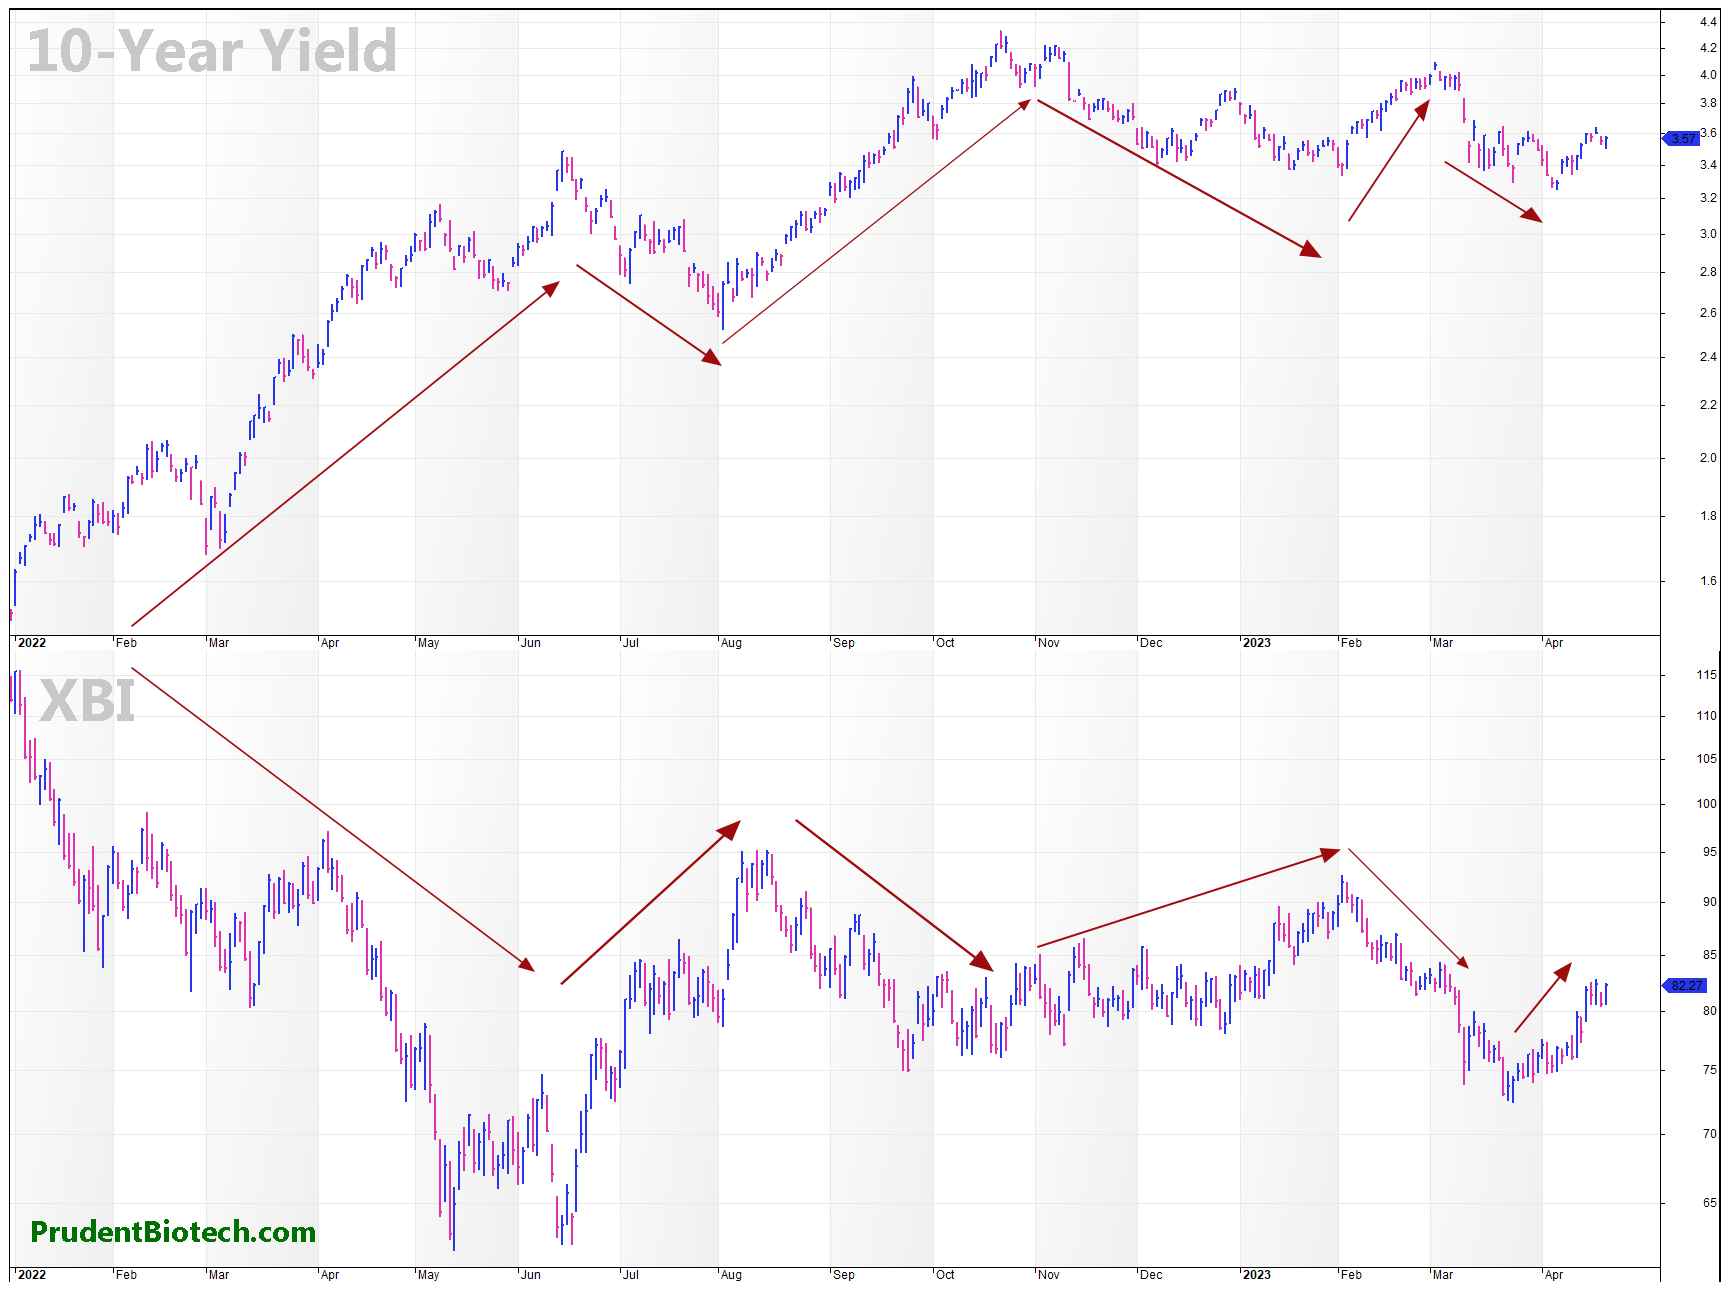 PrudentBiotech.com, Negative Correlation between 10 year Yield and S&P Biotechnology Index (XBI)